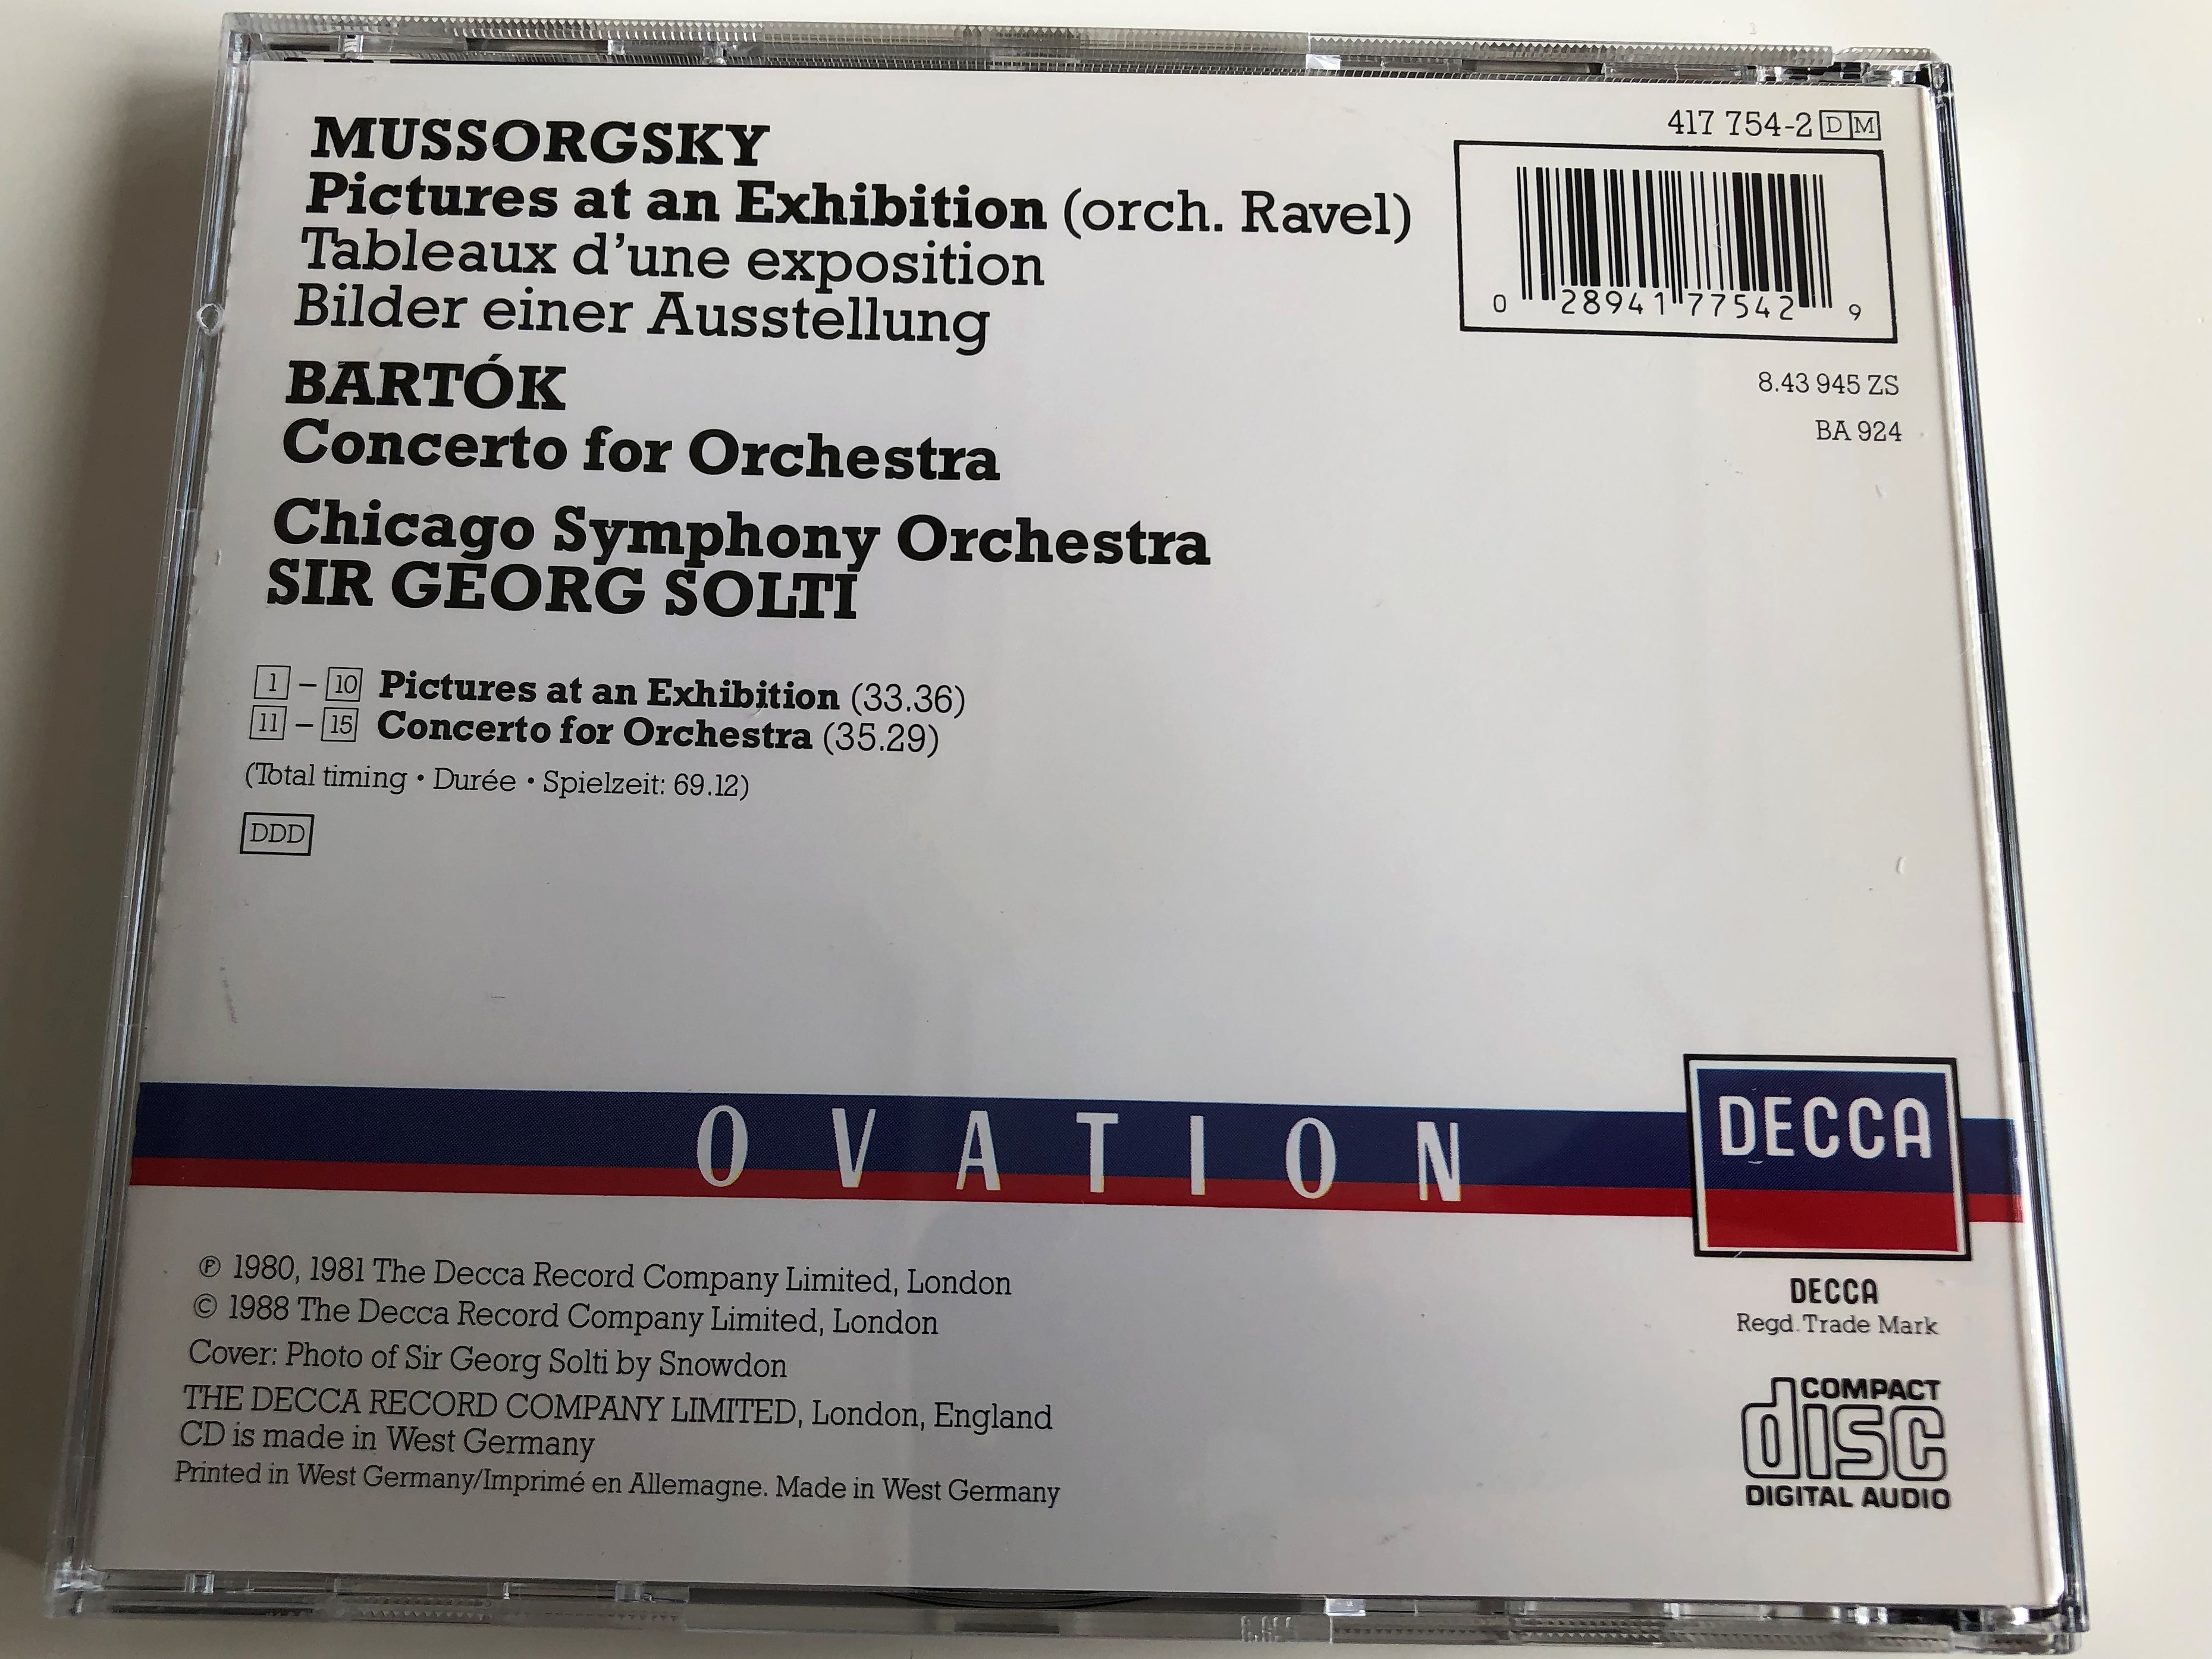 mussorgsky-ravel-pictures-at-an-exhibition-bart-k-concerto-for-orchestra-chicago-symphony-orchestra-sir-georg-solti-decca-audio-cd-1988-stereo-417-754-2-3-.jpg